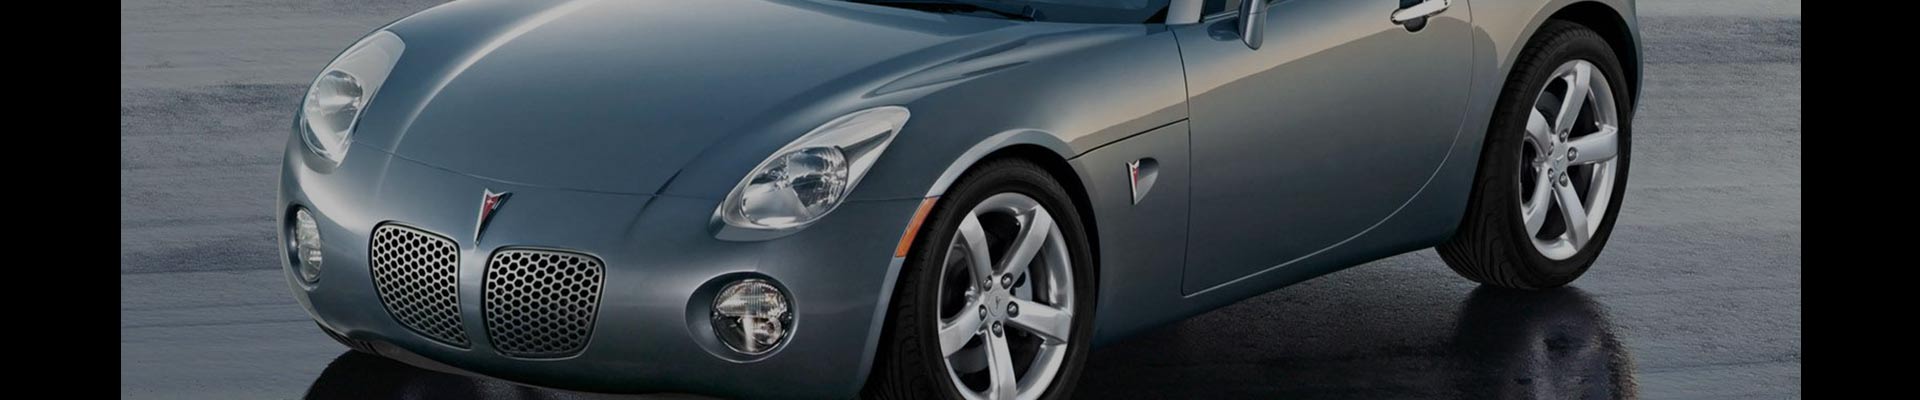 Shop Replacement and OEM 2006 Pontiac Solstice Parts with Discounted Price on the Net